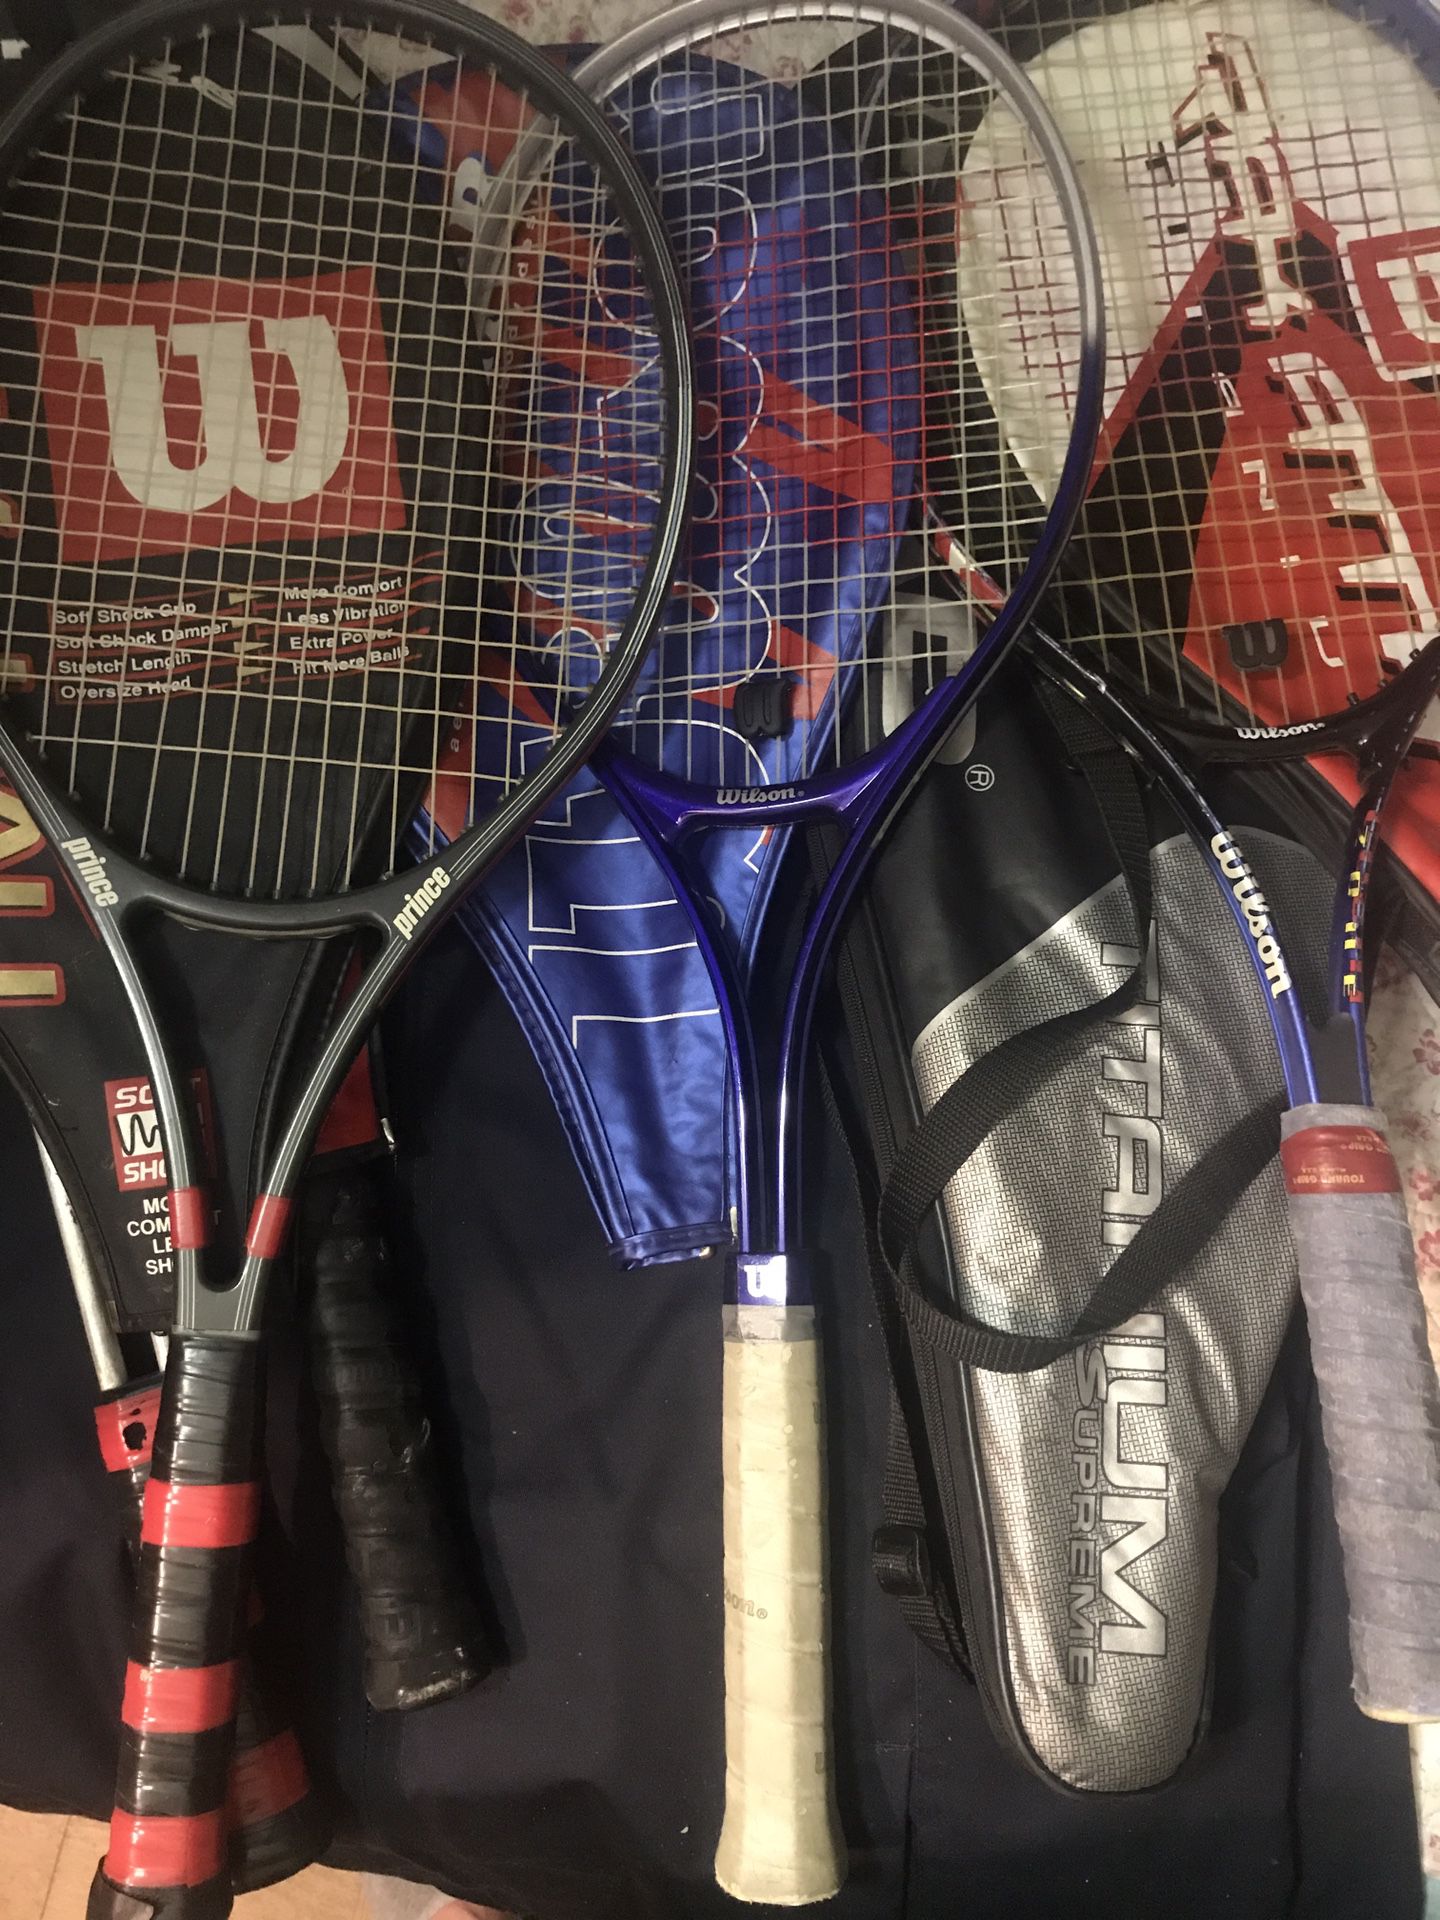 6 new Tennis rackets with cover